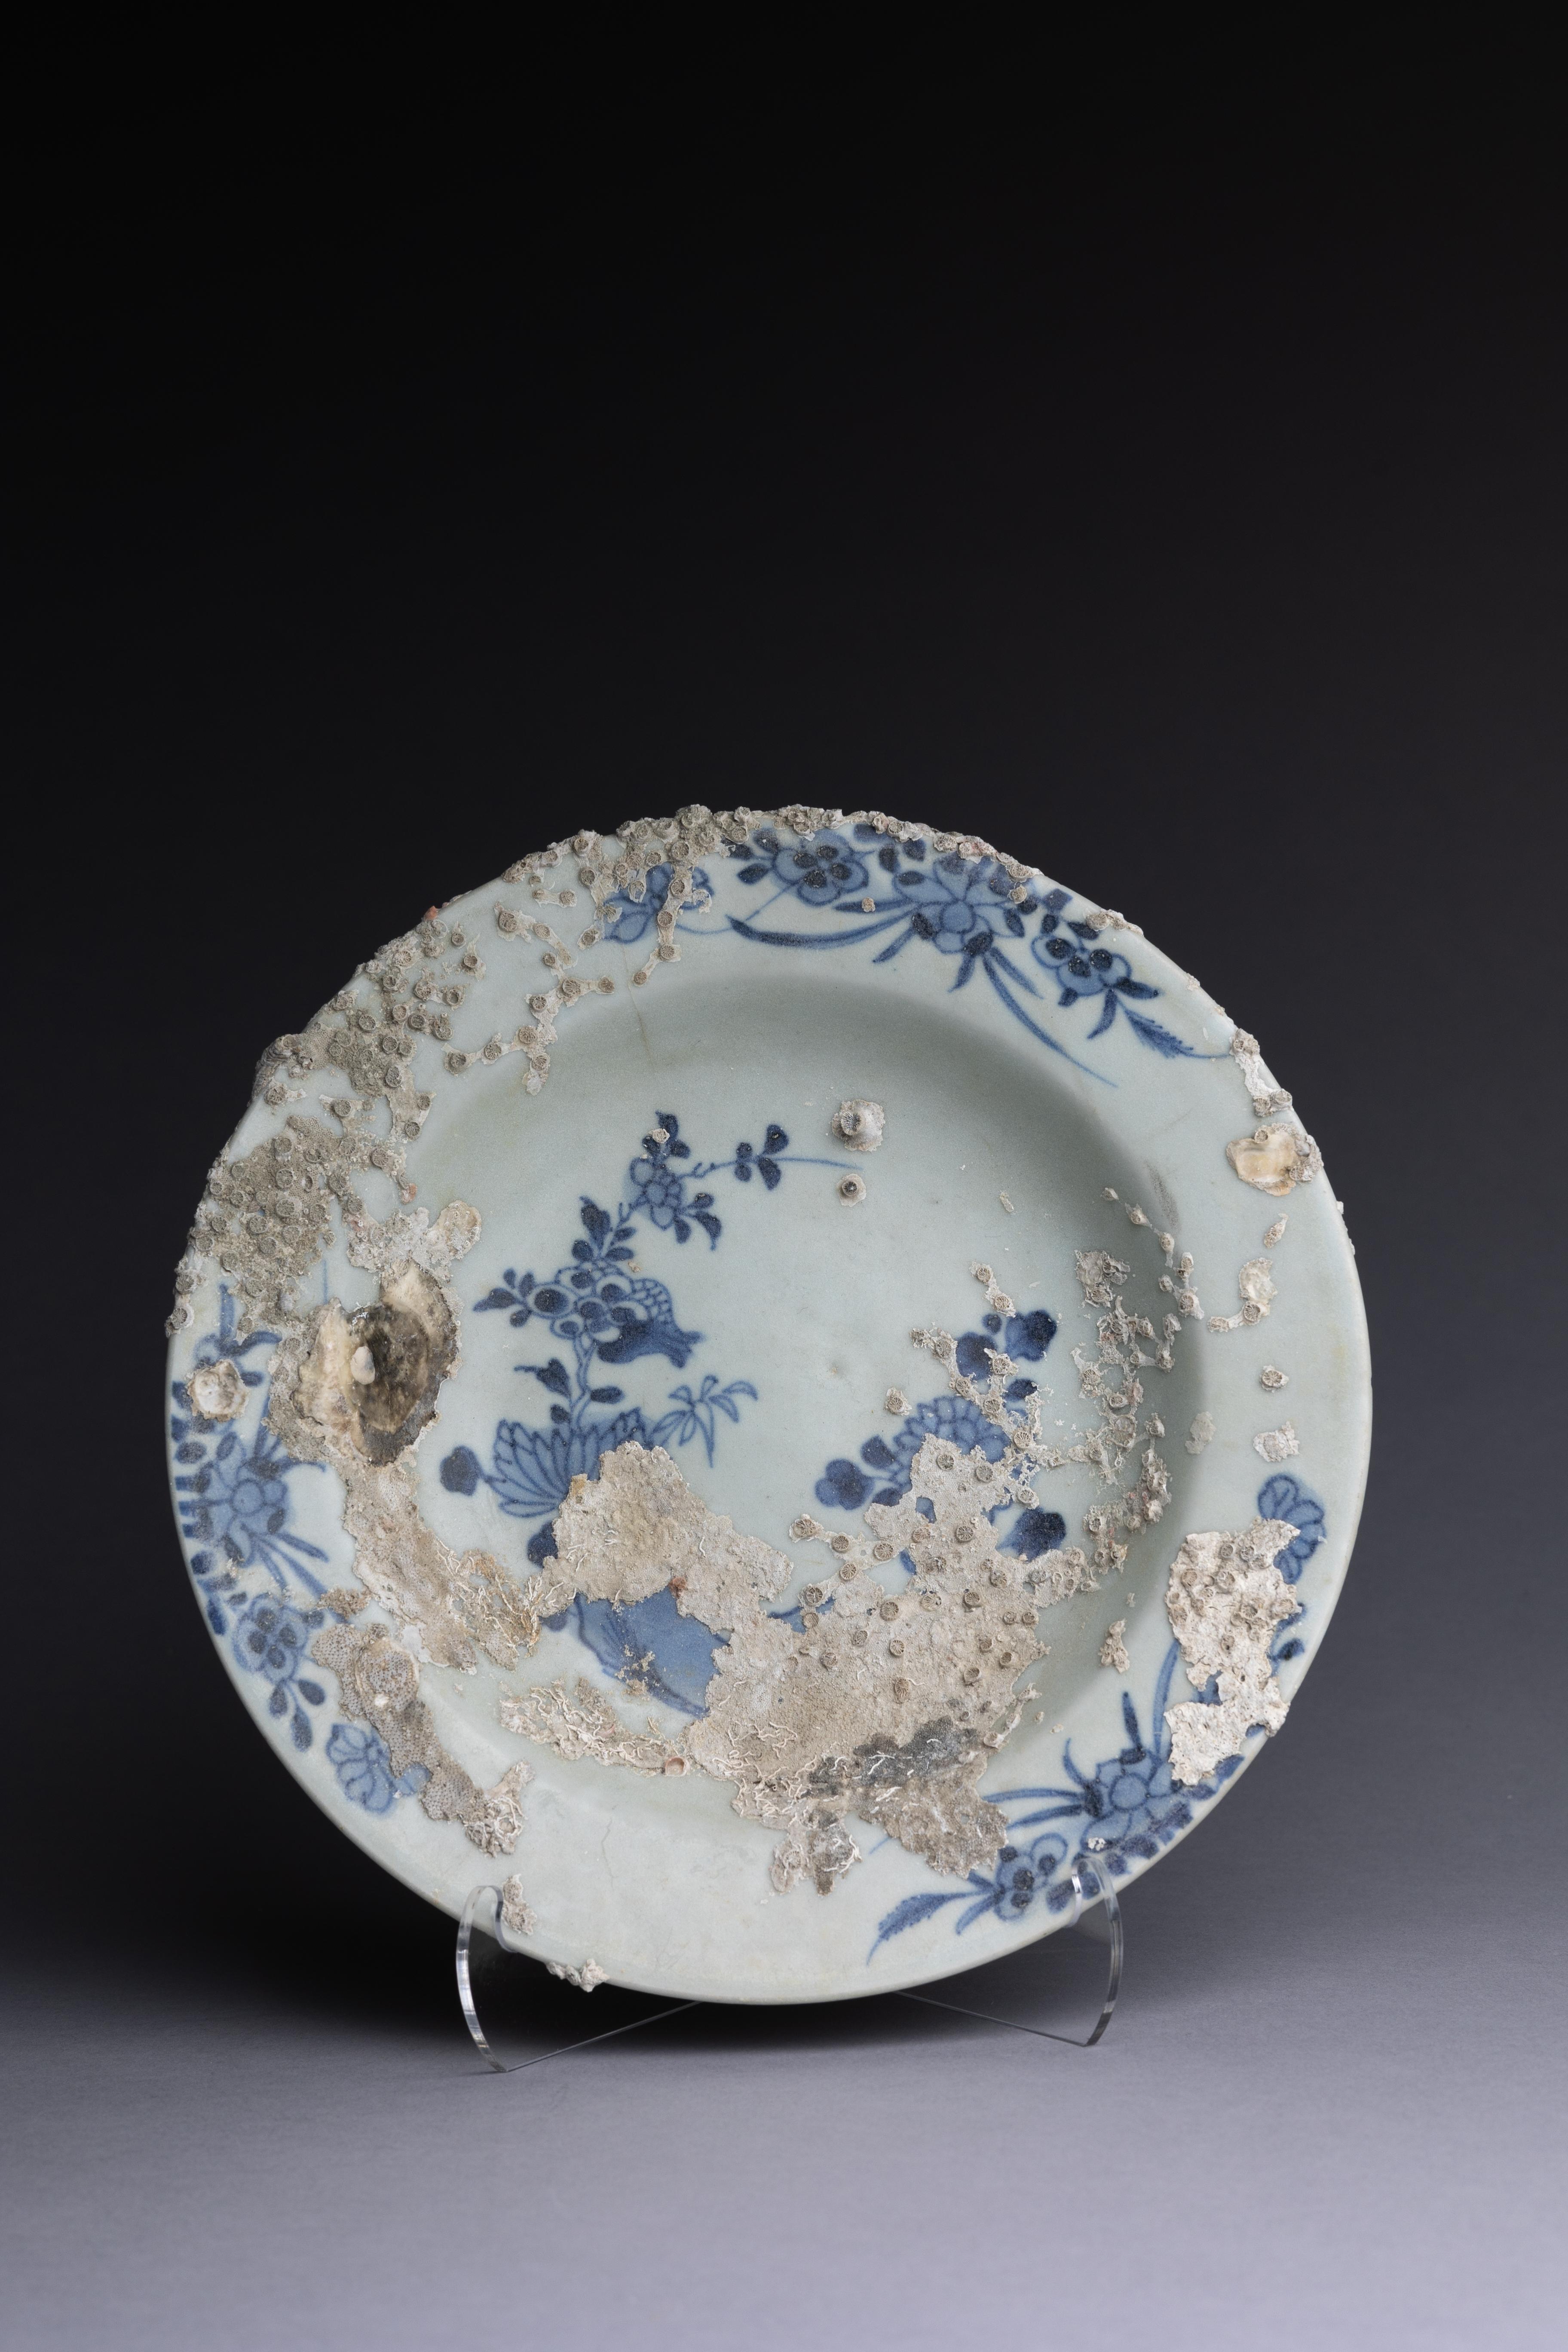 A Chinese export porcelain shipwreck soup dish from the Hatcher Porcelain Cargoes, made in the early to mid-18th century.

This Chinese porcelain soup dish was created specifically for export to the European market. It was used for soup or broth